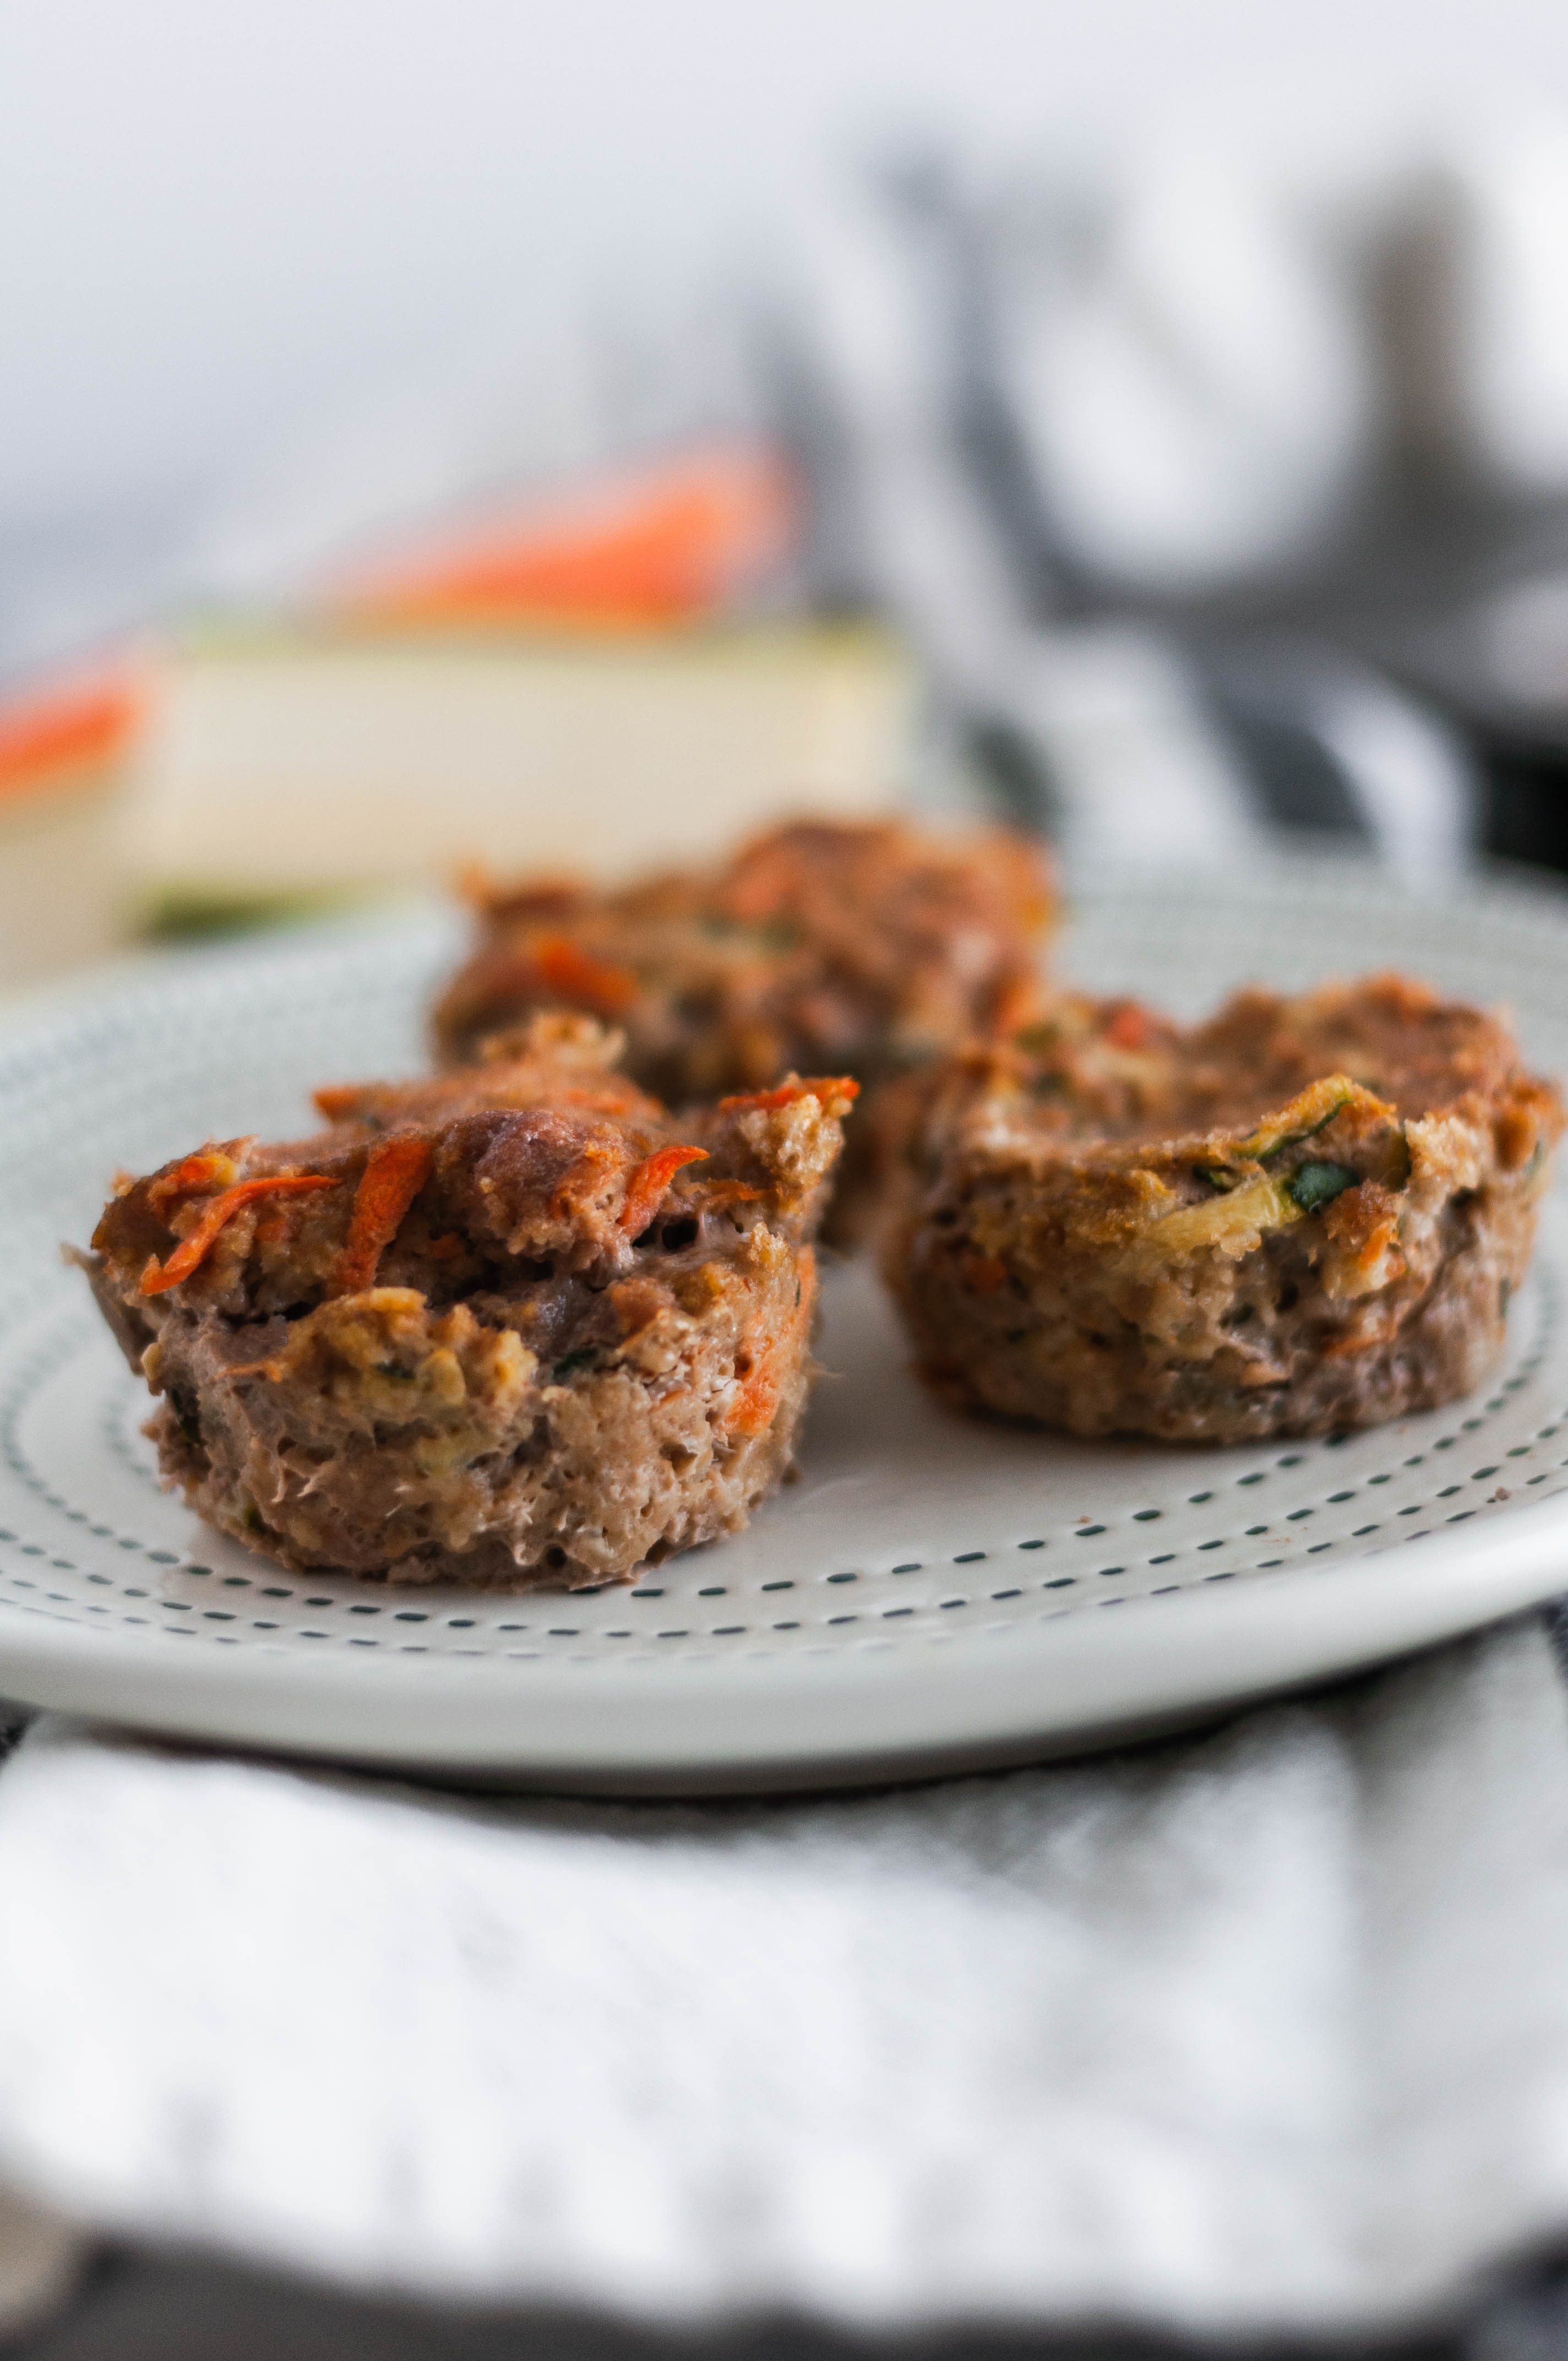 If you're looking for a healthy weeknight meal, these Mini Turkey Meatloaf Cups are packed with lean turkey and lots of vegetables. Top with ketchup, barbecue sauce or honey mustard.